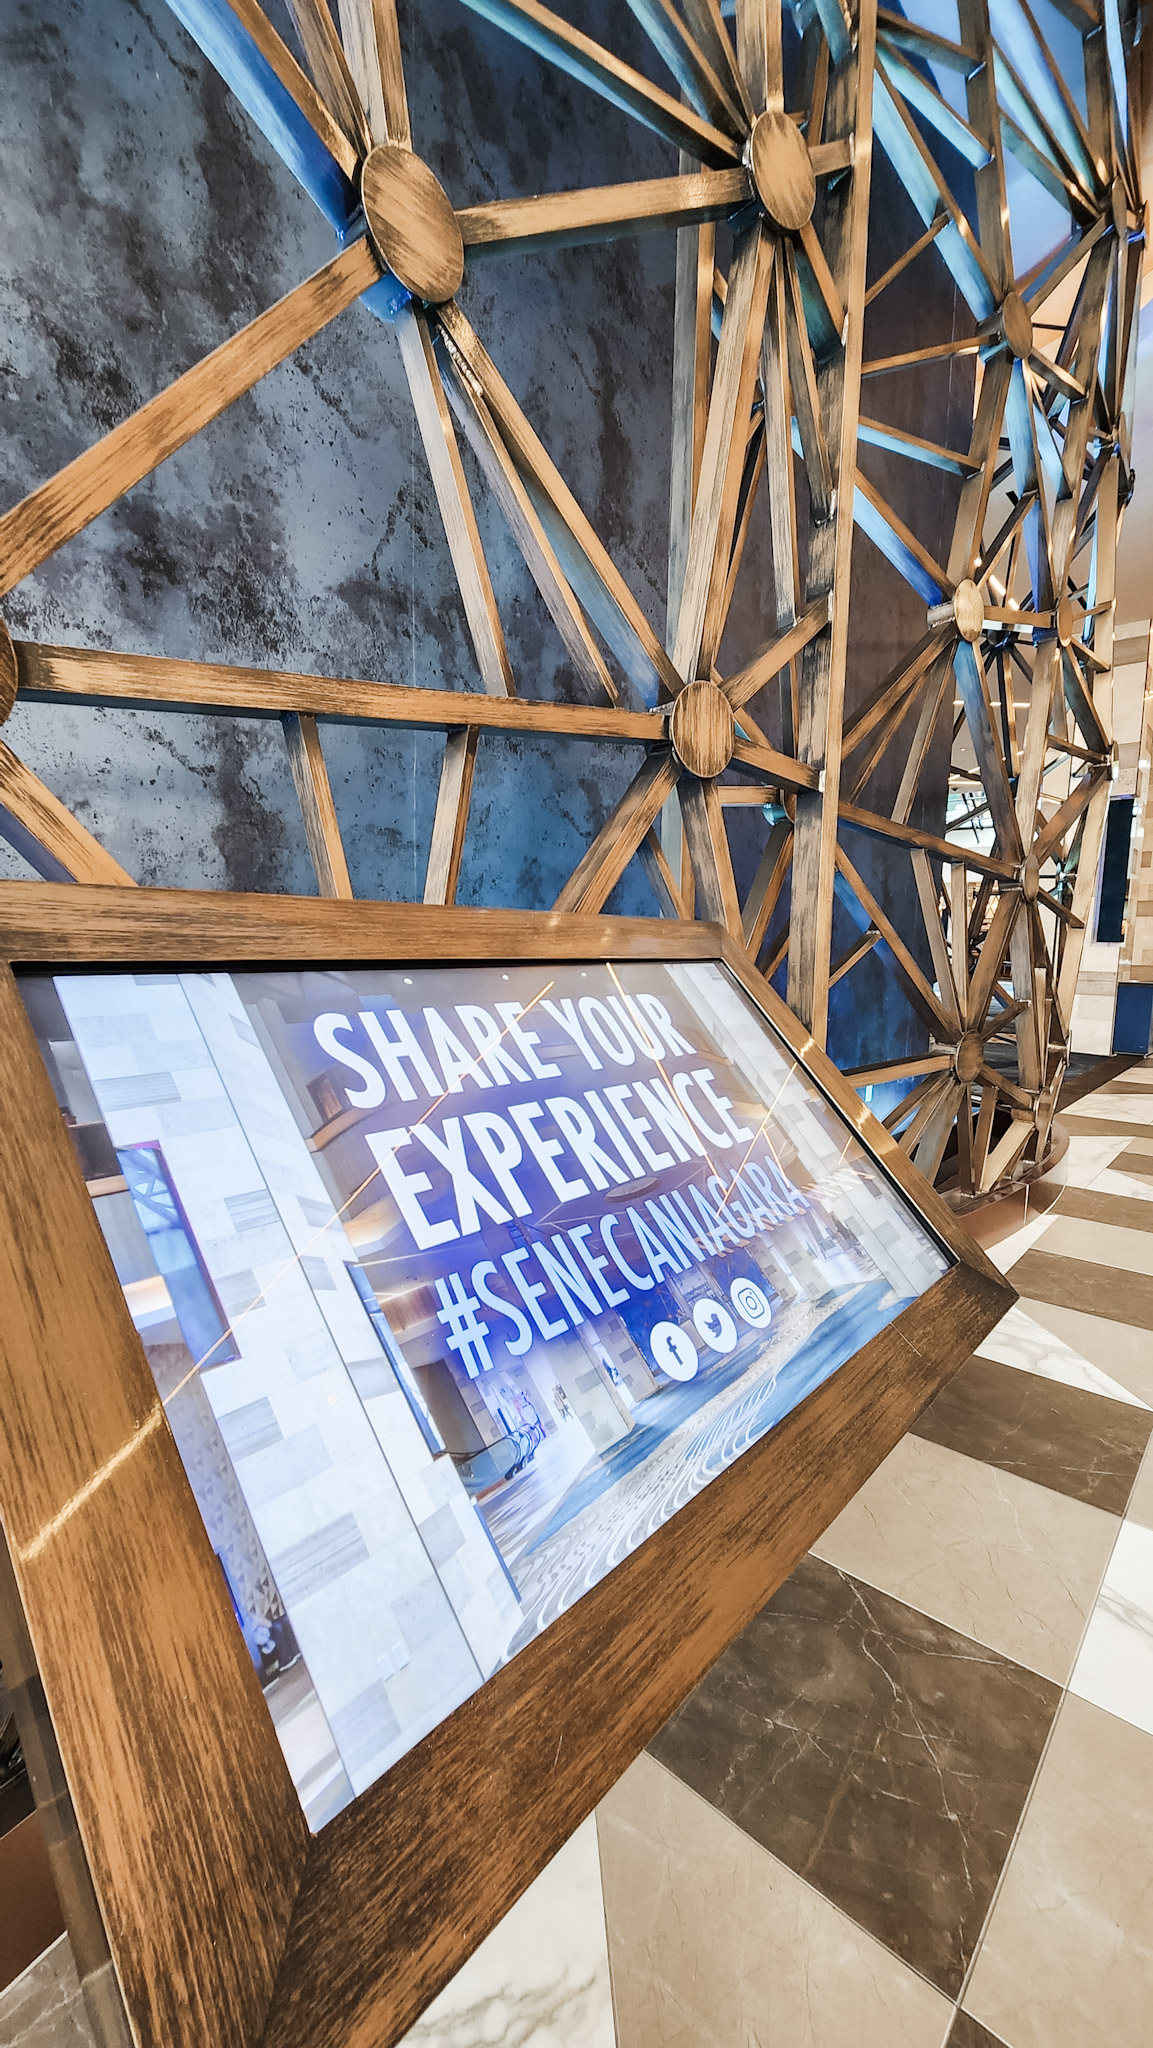 A screen that says share your experience at #SenecaNiagara.